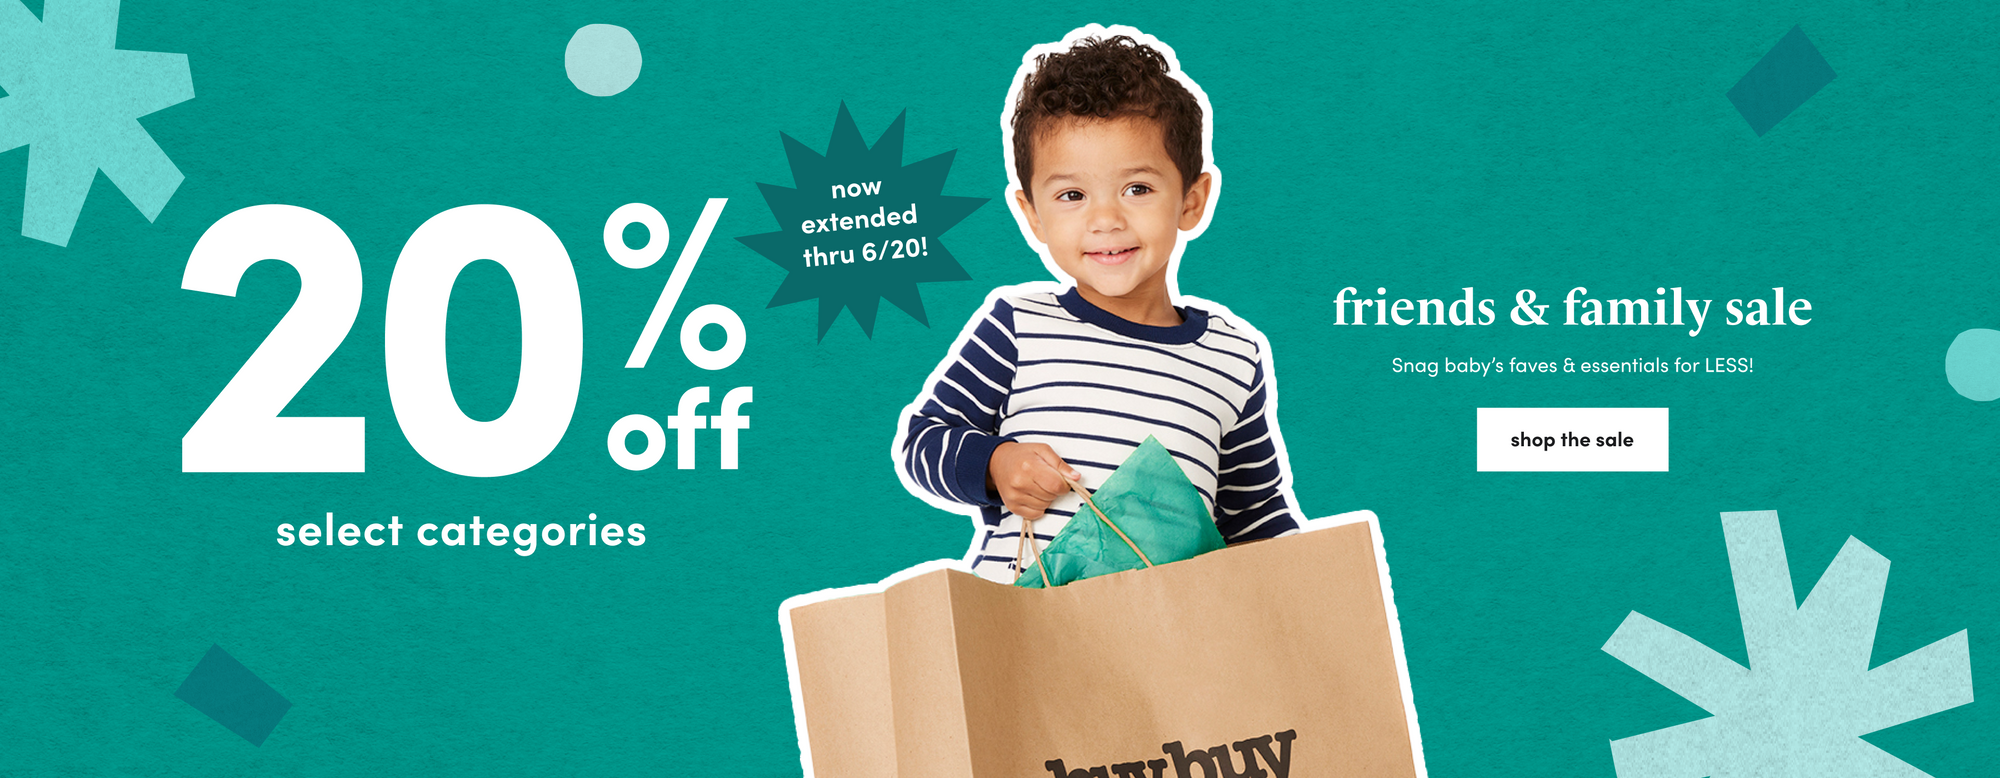 friends & family sale 30% off select categories now extended  thru 6/20!